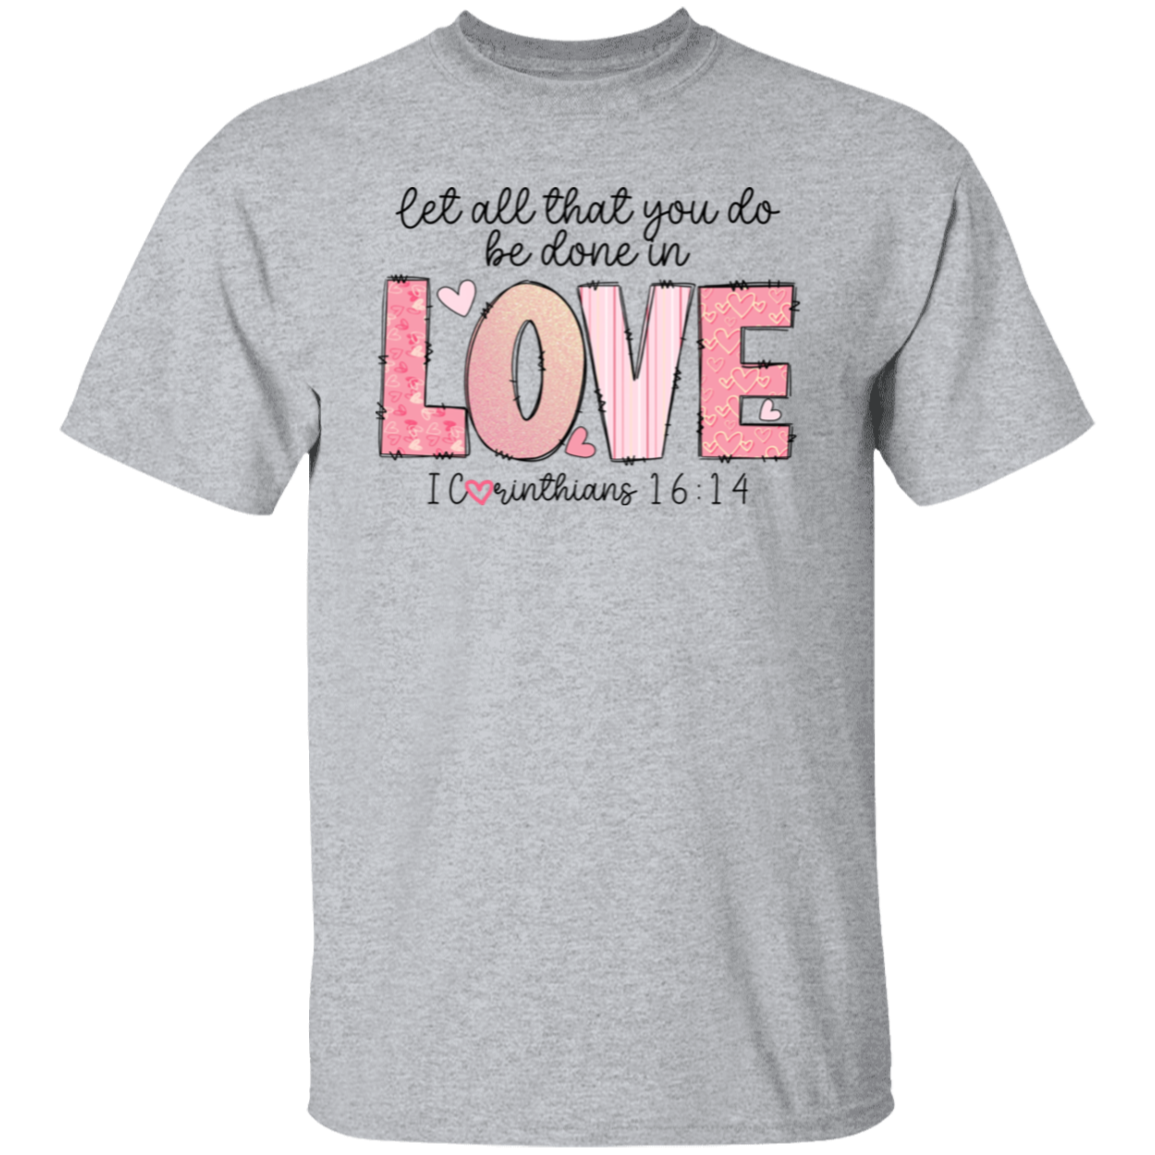 Let All that you do be done in Love T-Shirt